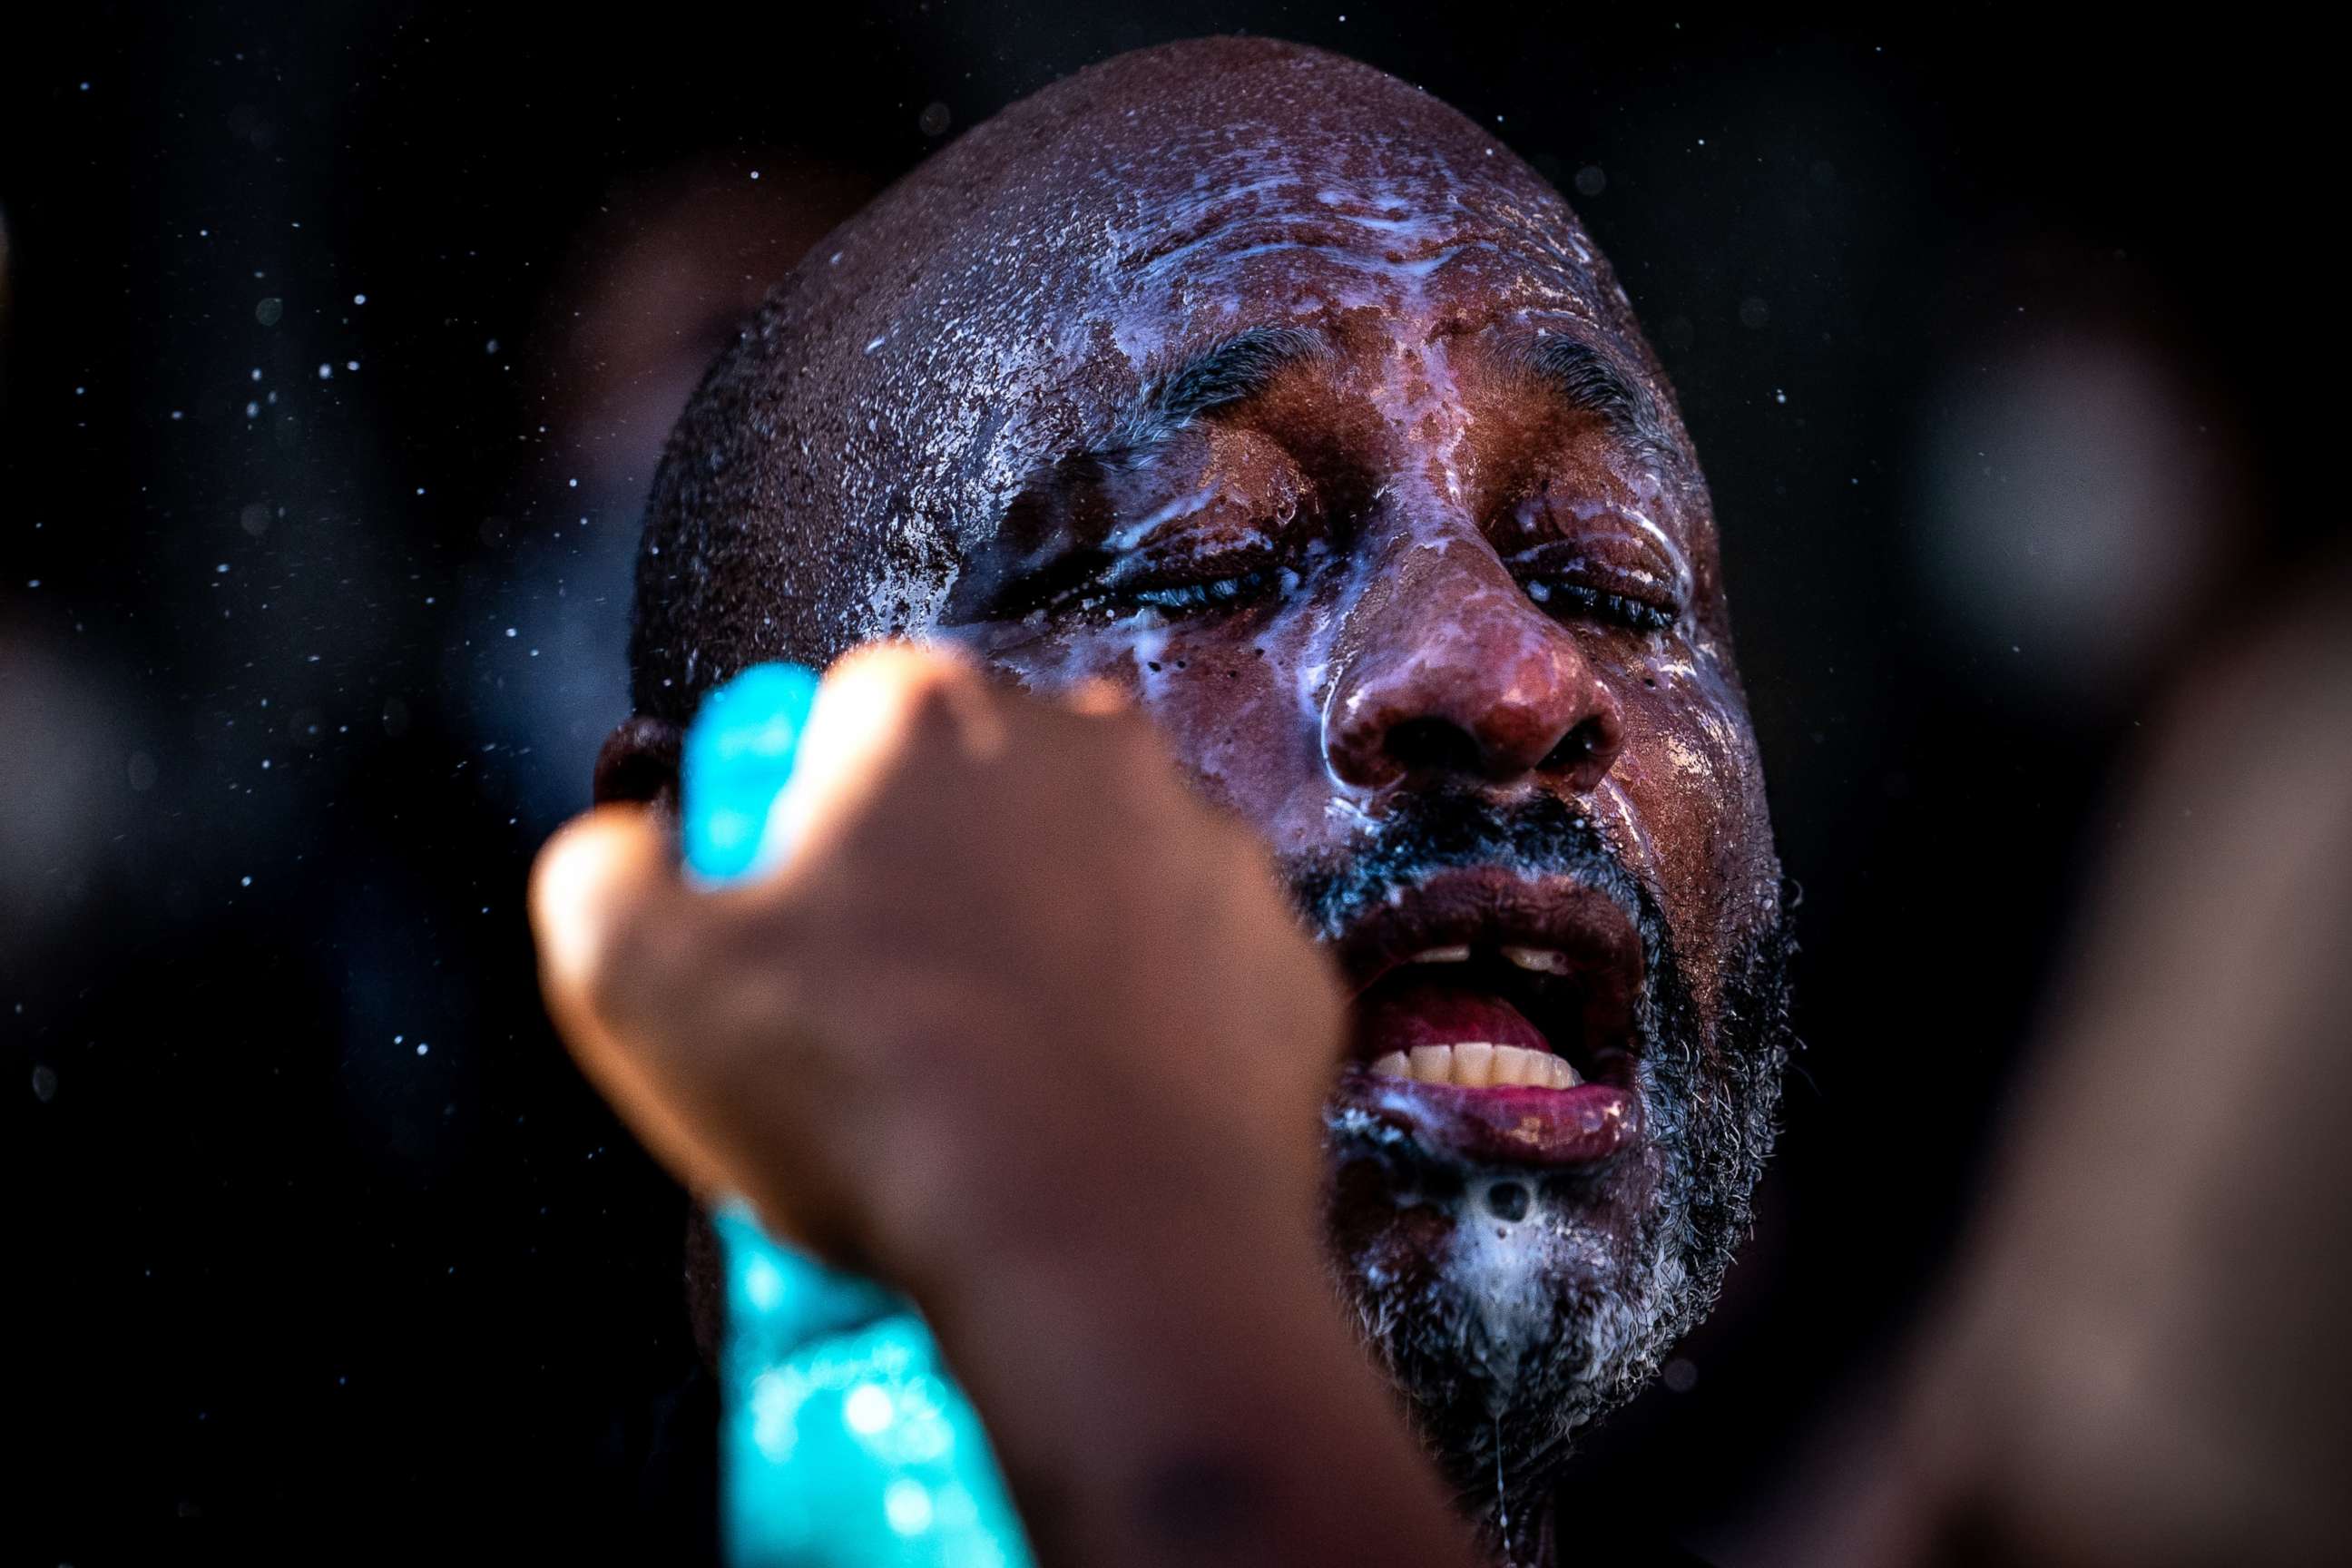 PHOTO: A protester's face is washed off after police dispersed demonstrators near the White House in Washington, June 1, 2020.